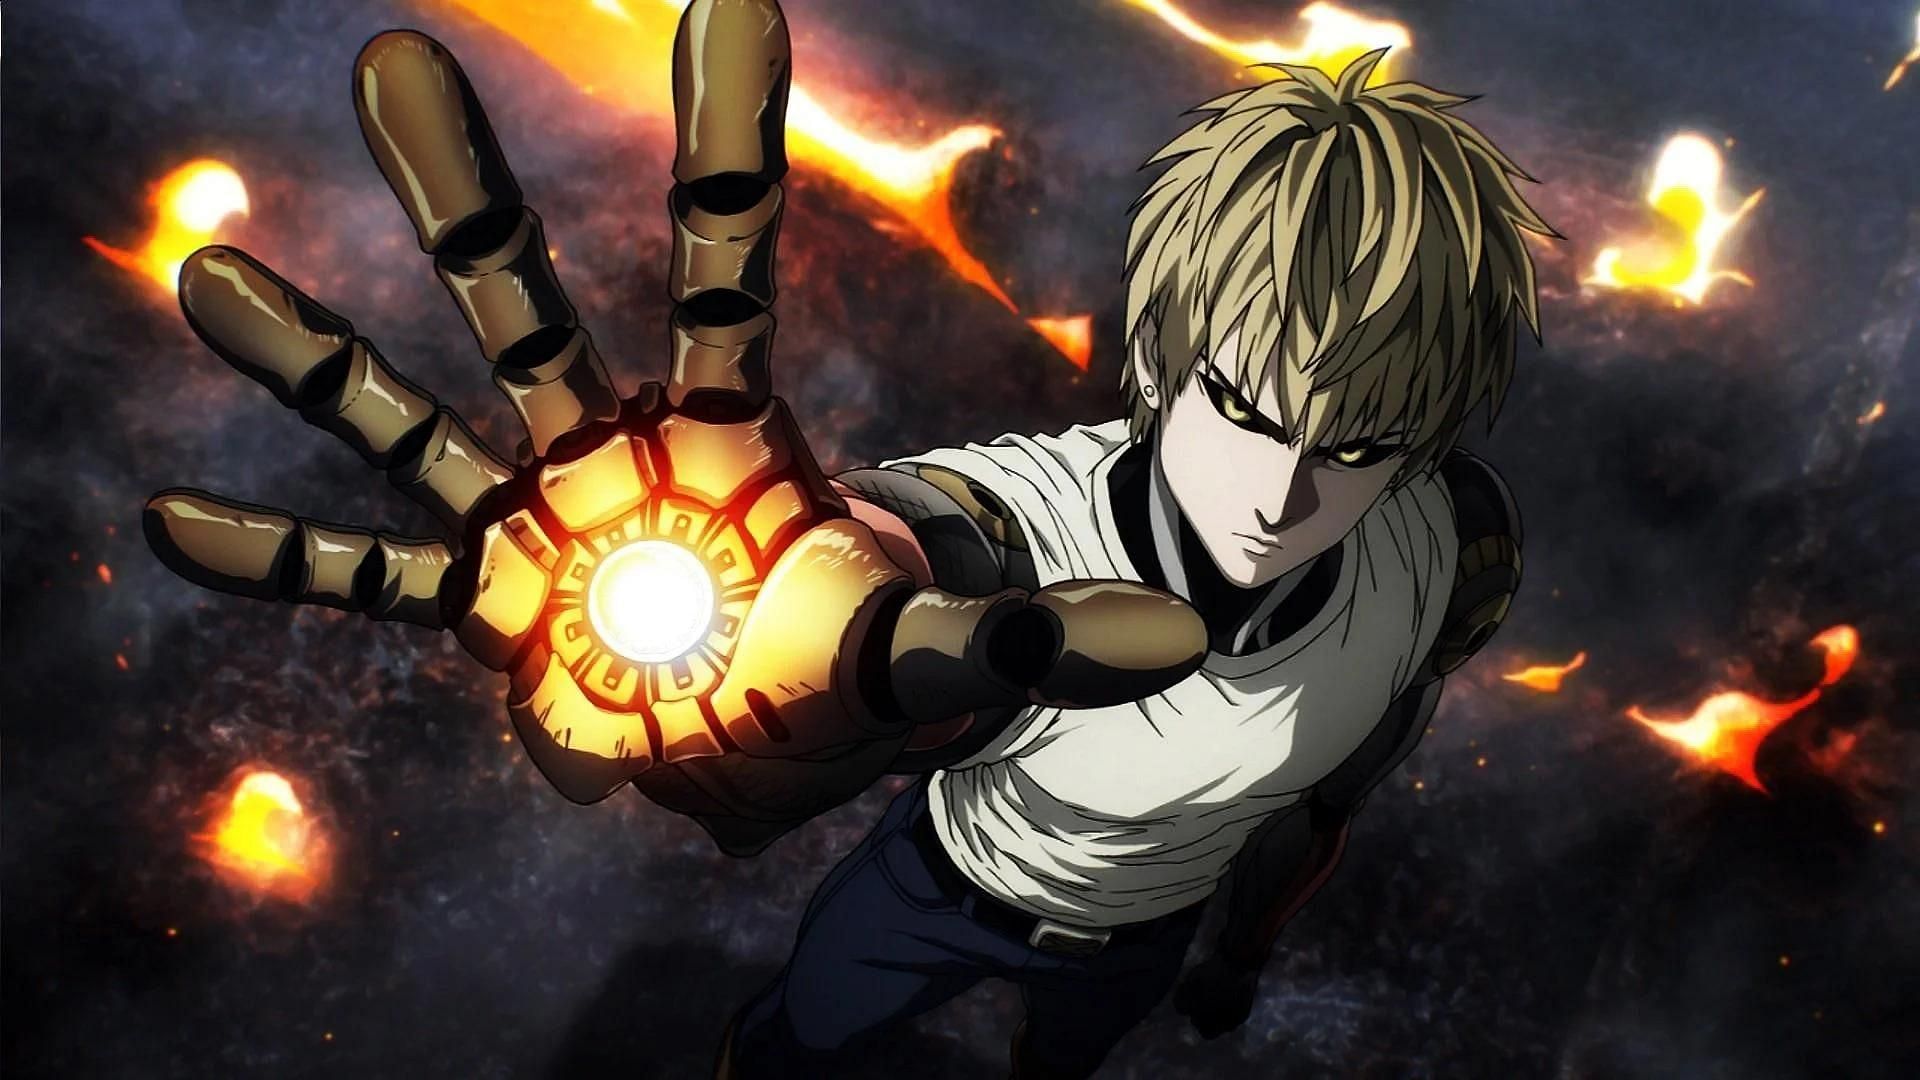 Genos as seen in One Punch Man season 1 (Image via Madhouse)